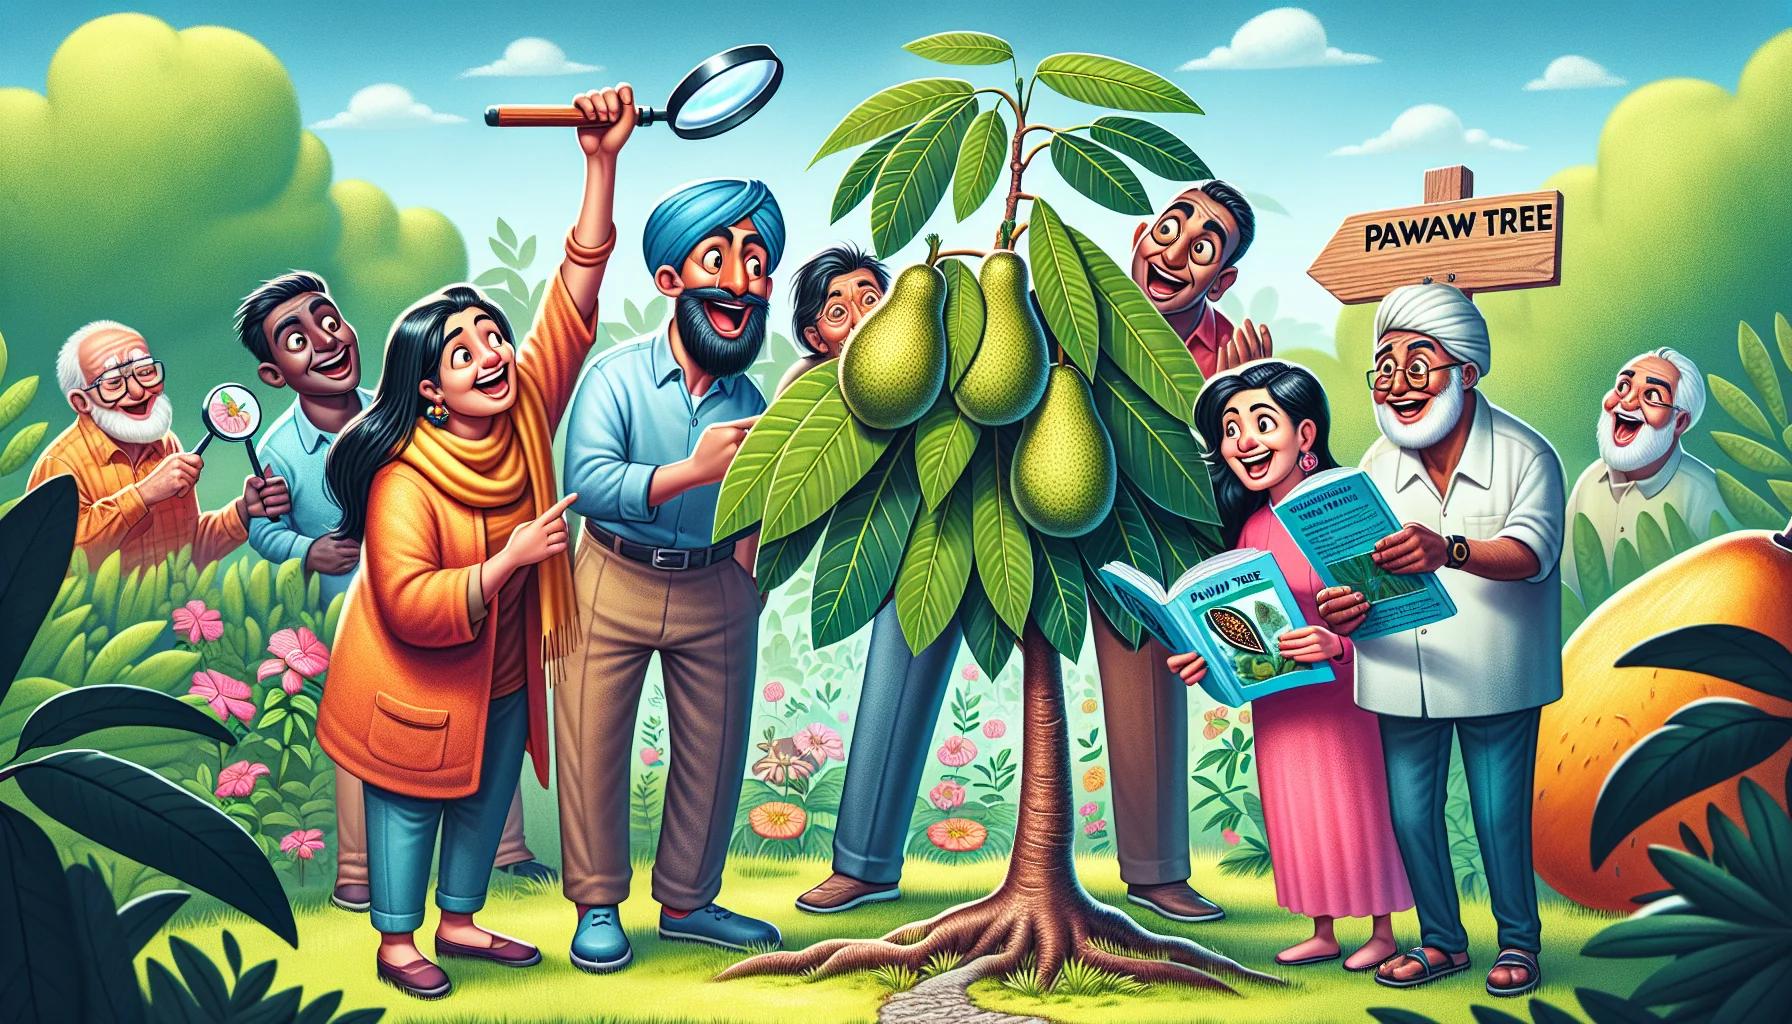 Create a vivid and humorous image of a pawpaw tree identification scenario. Set the scene in a lush and vibrant garden wherein a group of people joyously participate. Overly exaggerated features such as an oversized magnifying glass held by a tall Middle-Eastern man inspecting the pawpaw leaves, and a peppy Hispanic woman posting a signpost in front of the tree that reads 'Pawpaw tree'. A South Asian man is standing by with a guidebook demonstrating the distinctive features of pawpaw trees to a mixed group of interested garden enthusiasts. Incorporate elements that encourage the viewer to explore the joys of gardening.